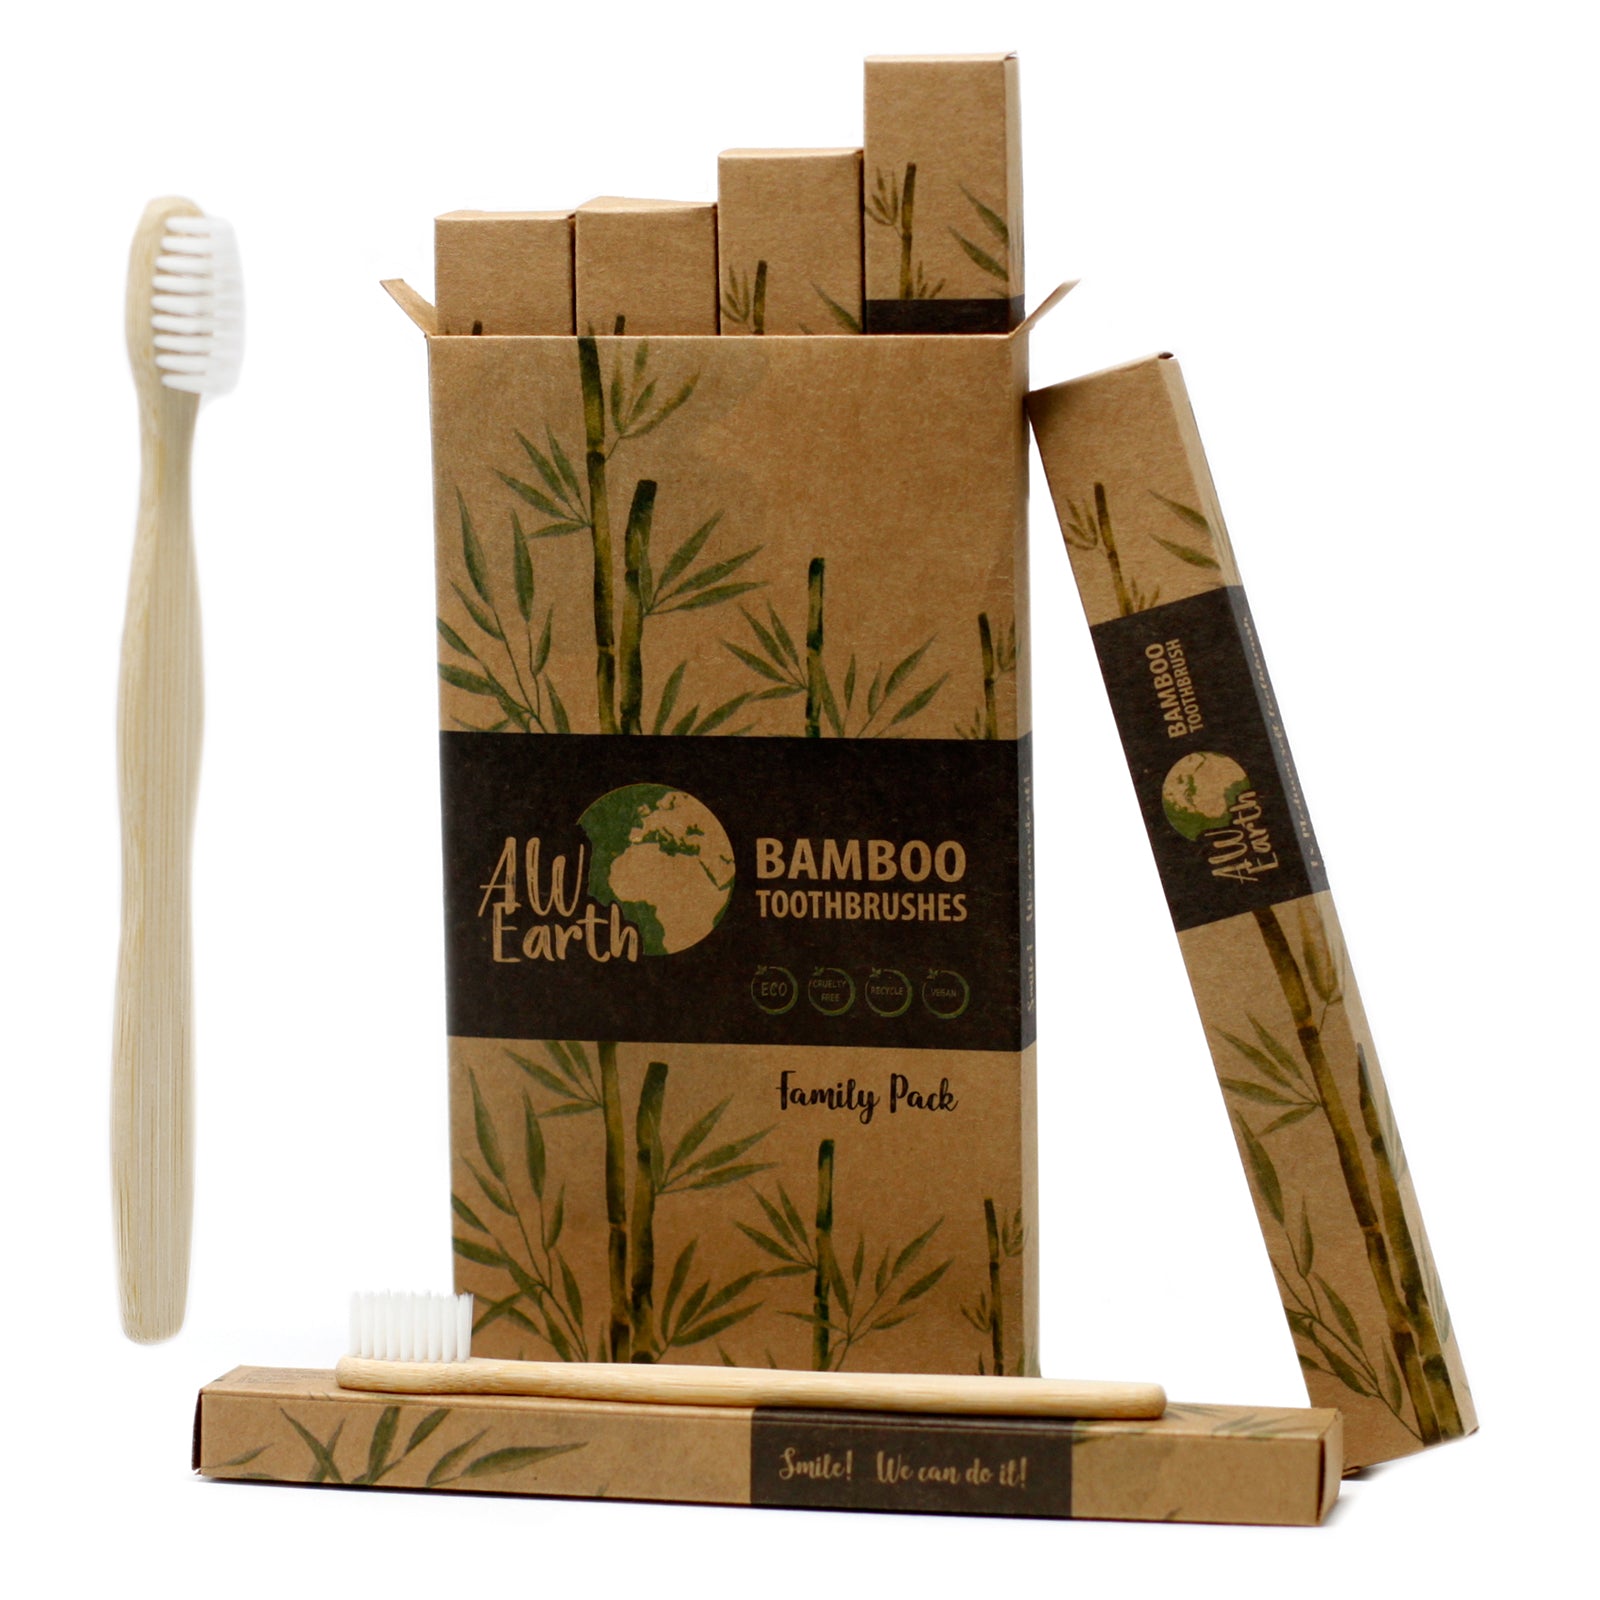 View Bamboo Toothbrush White Family Pack of 4 Med Soft information